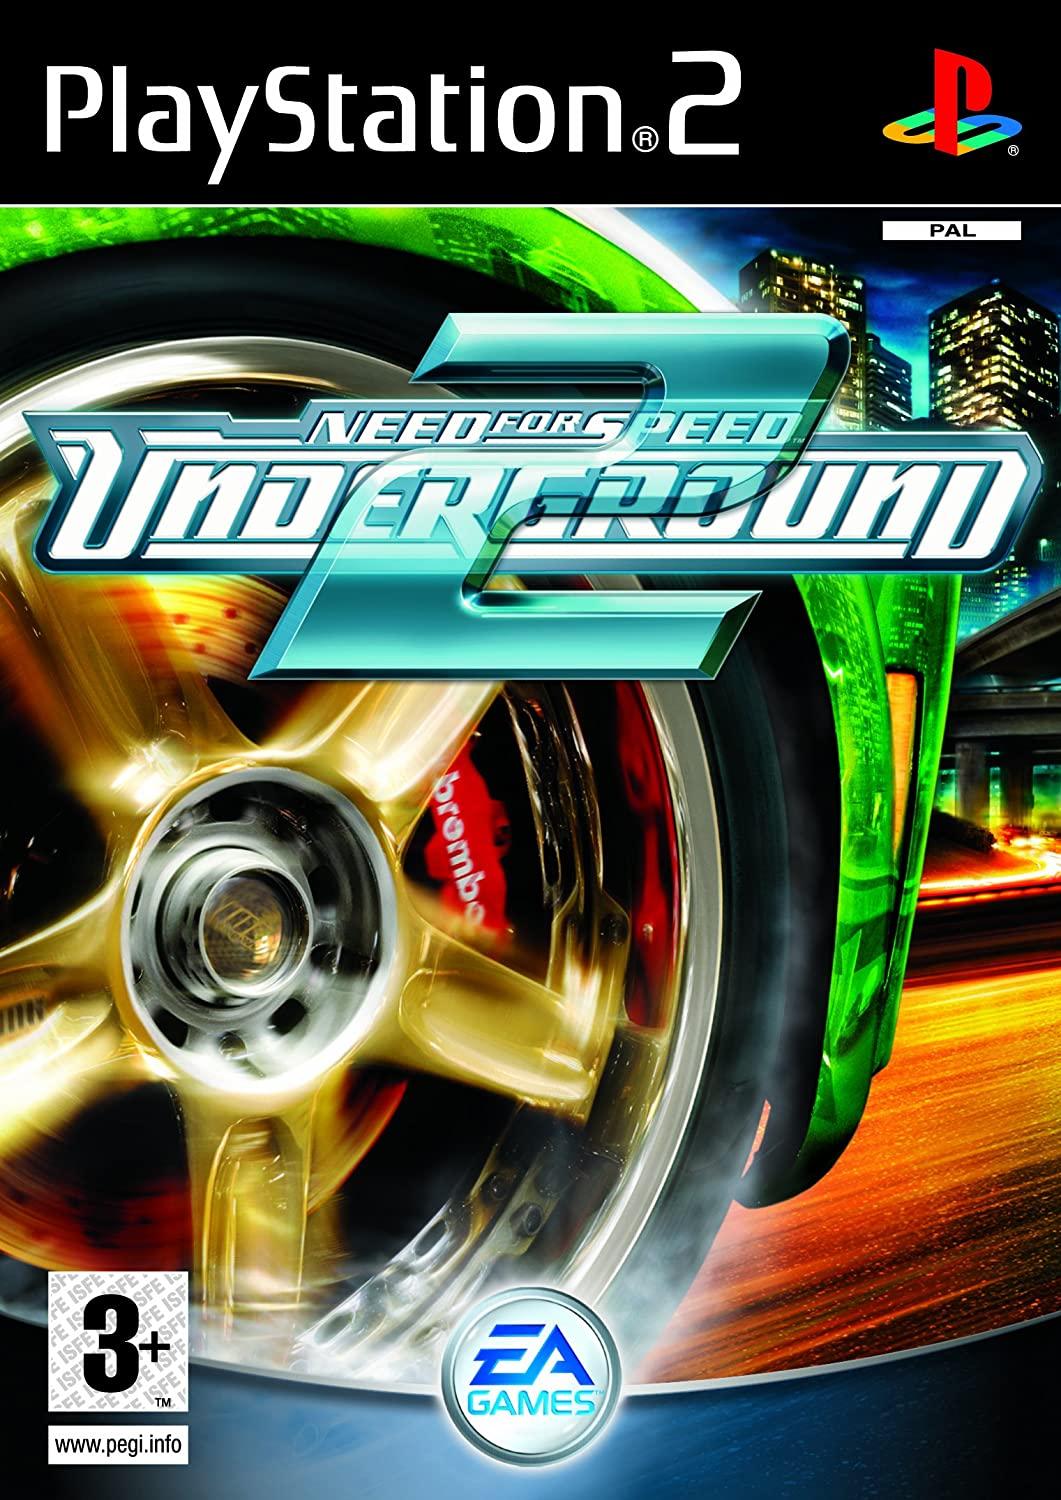 NEED FOR SPEED UNDERGROUND 2 (SIN MANUAL)